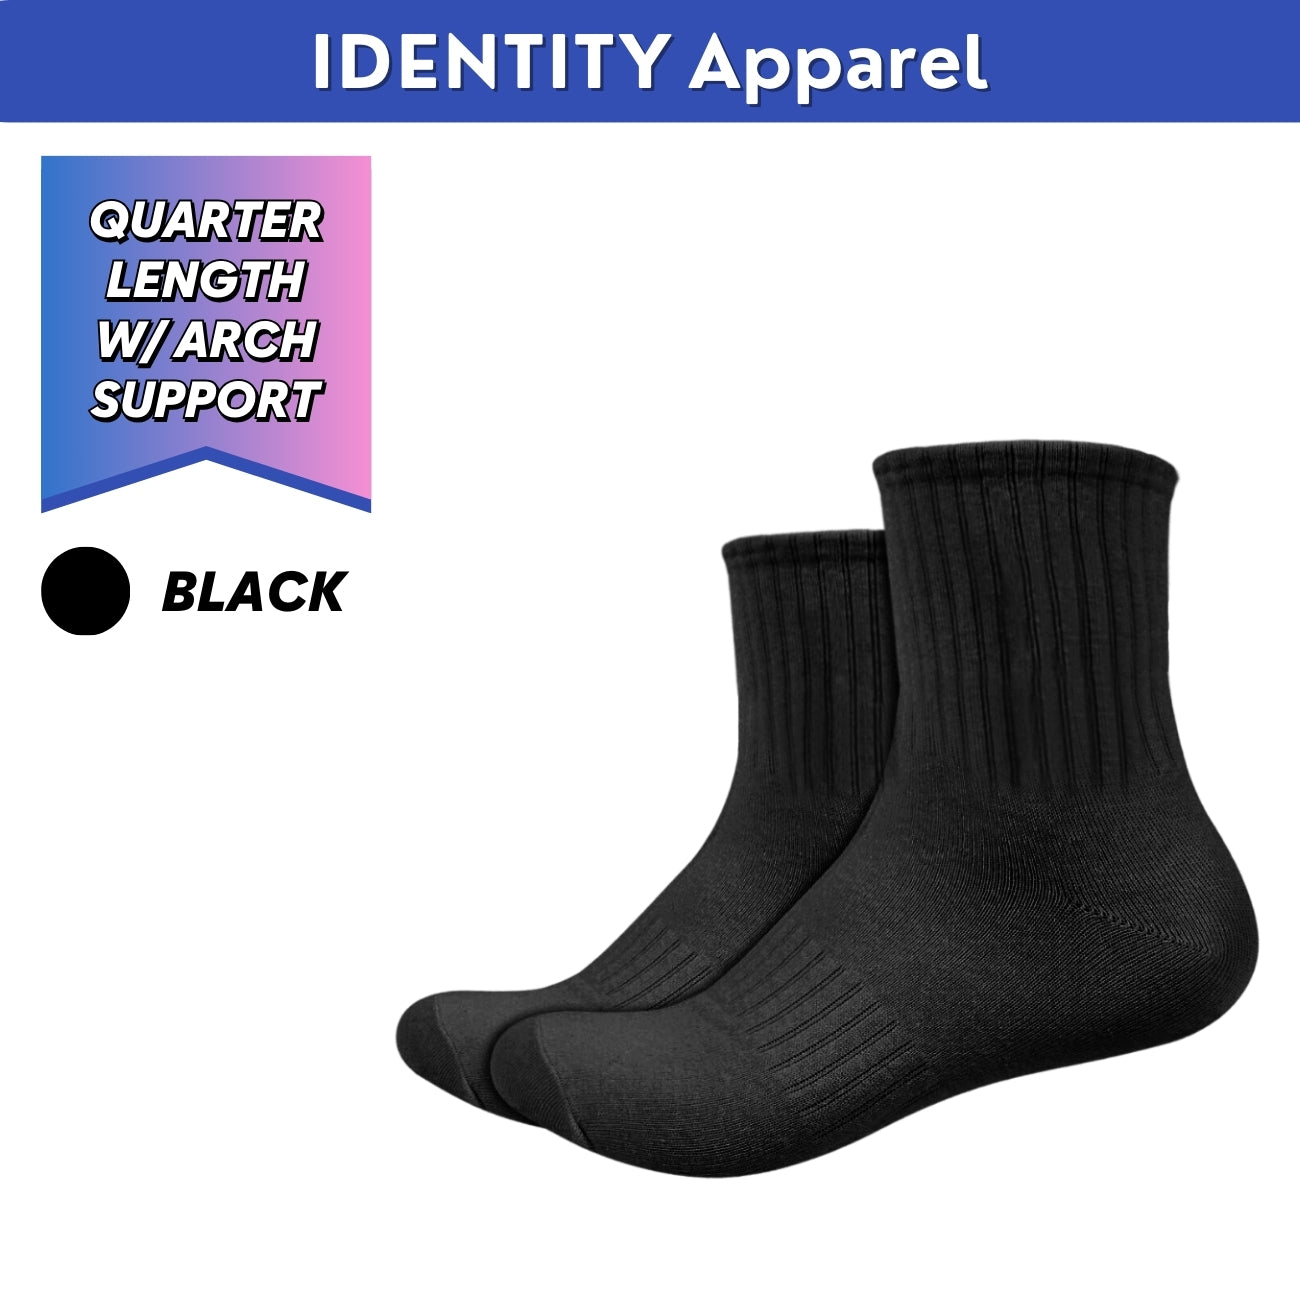 Mens Basic Quarter Length Cotton Socks with Arch Support - IDENTITY Apparel Shop